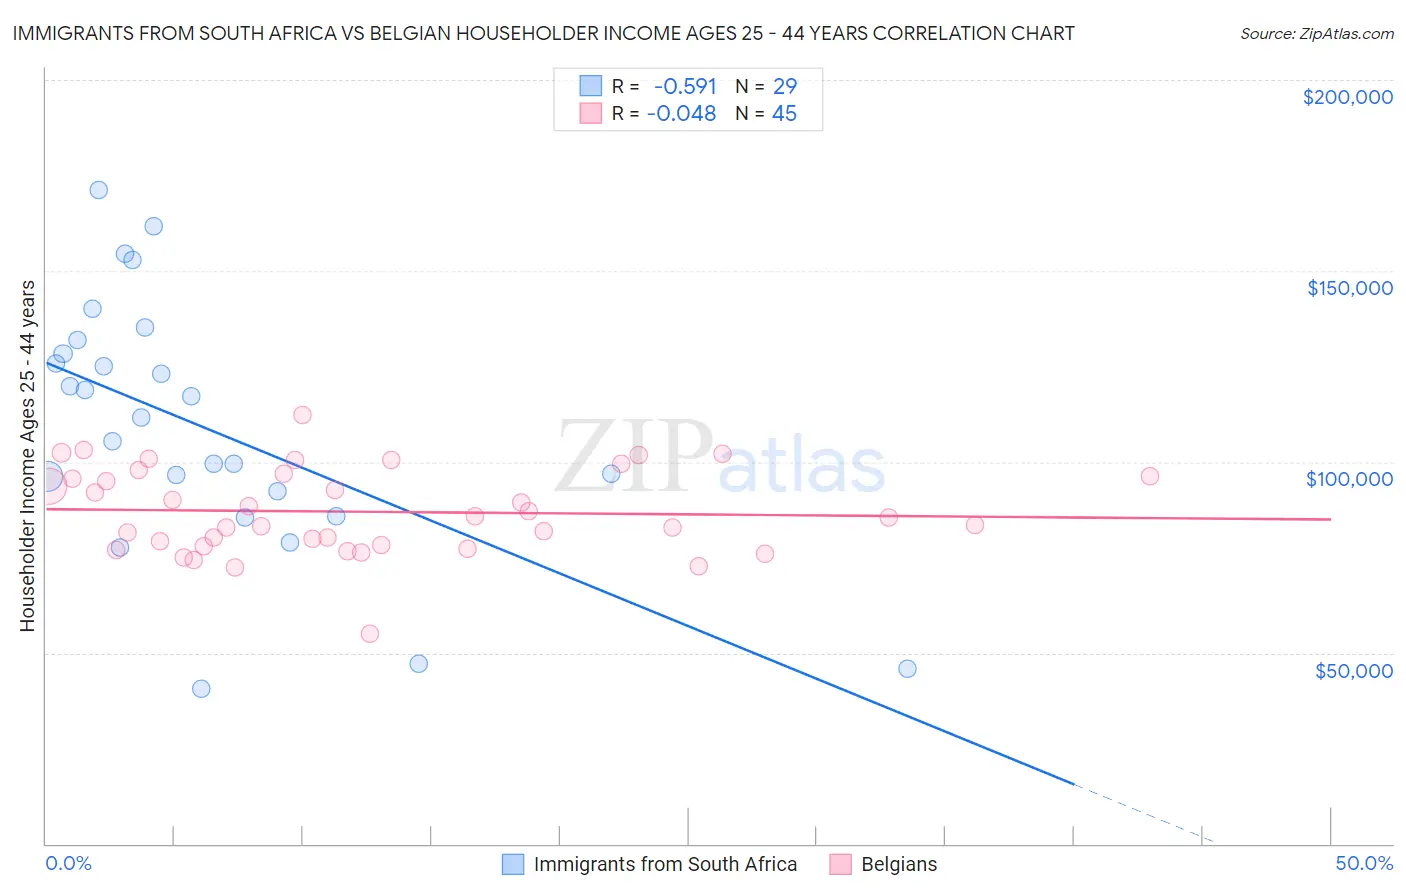 Immigrants from South Africa vs Belgian Householder Income Ages 25 - 44 years